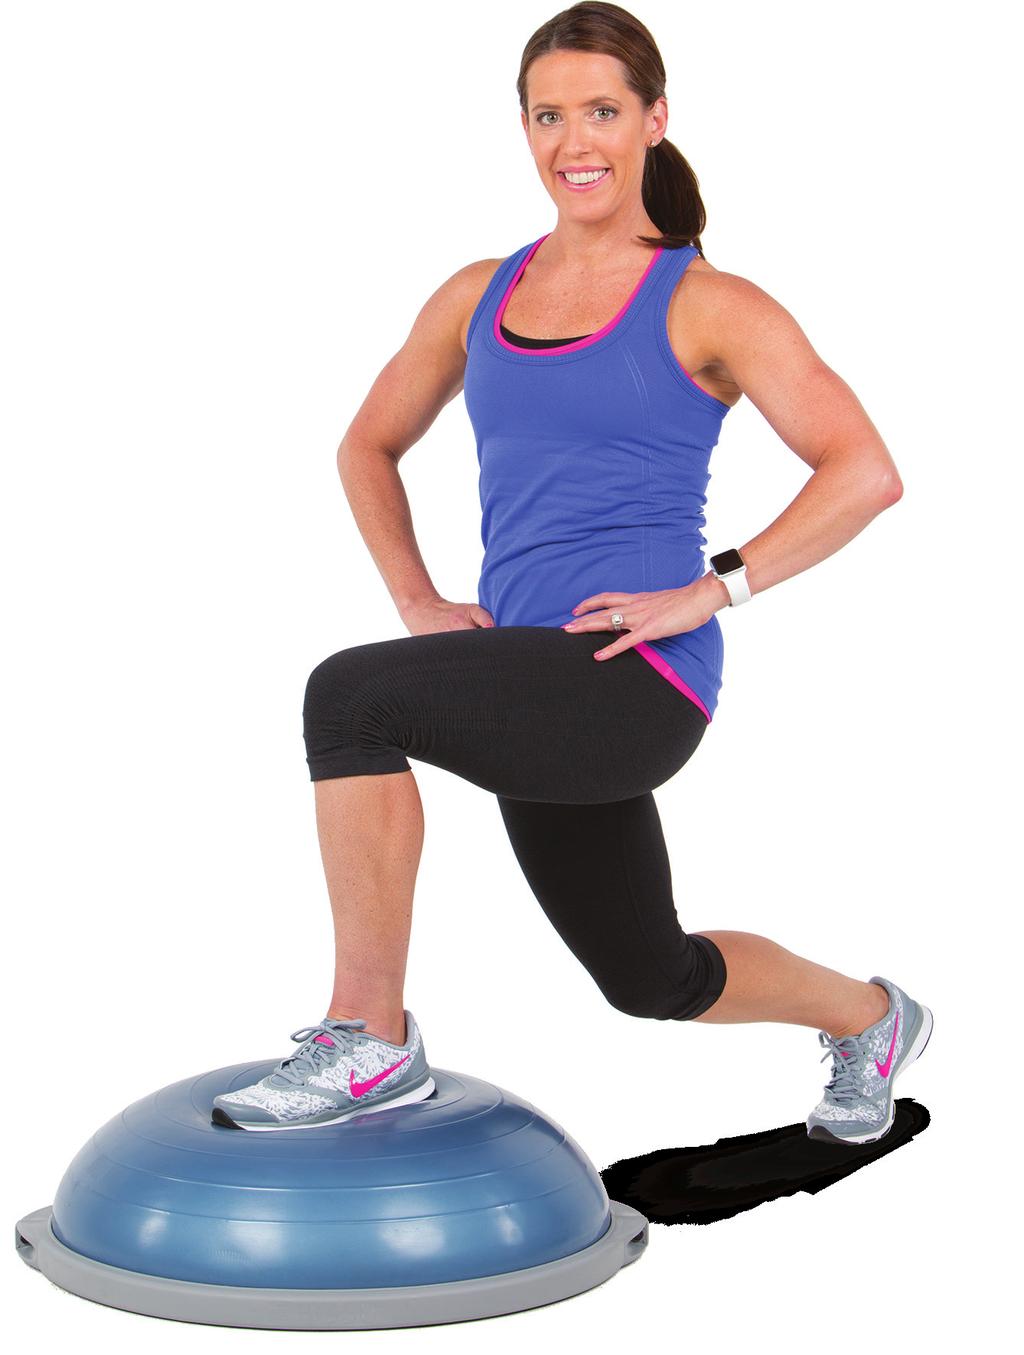 use it as a standalone product to make any exercise fun, challenging, and effective.